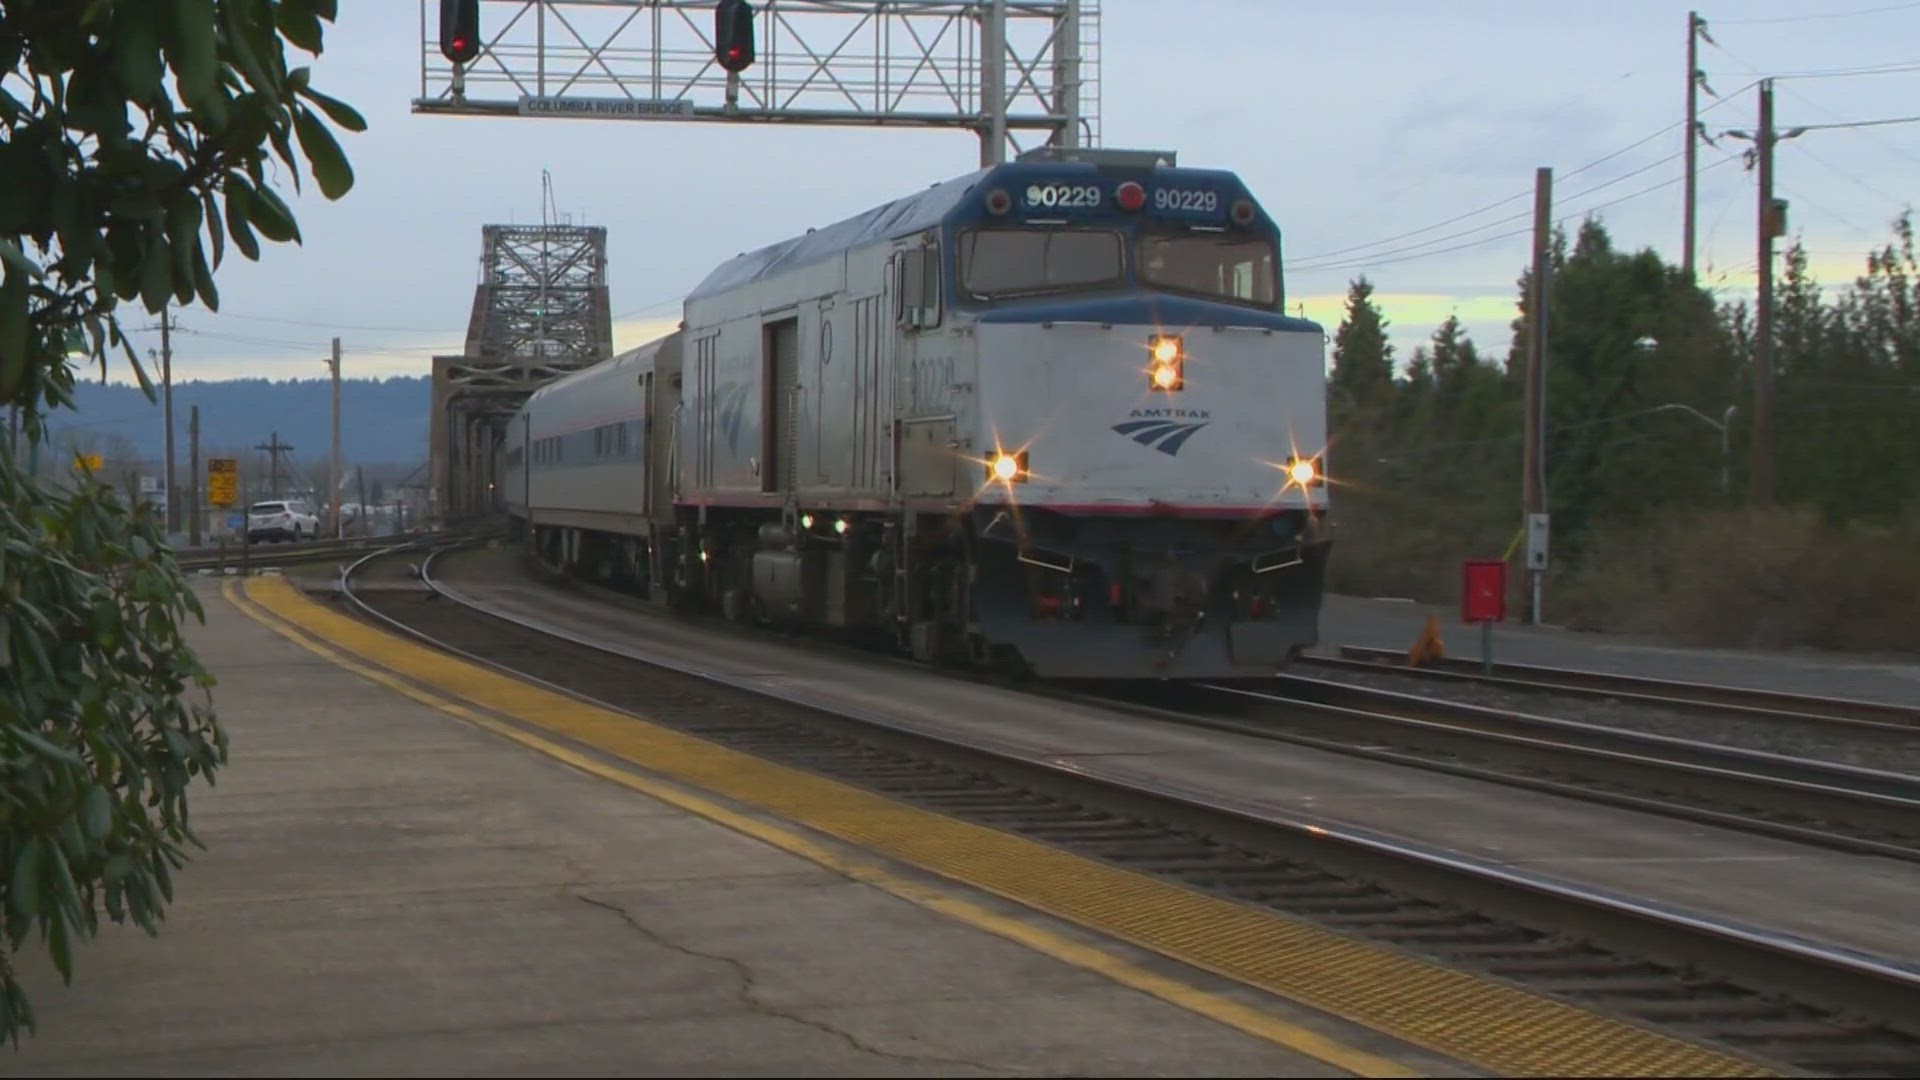 Amtrak increases service from Portland to Vancouver to six round trips a day.